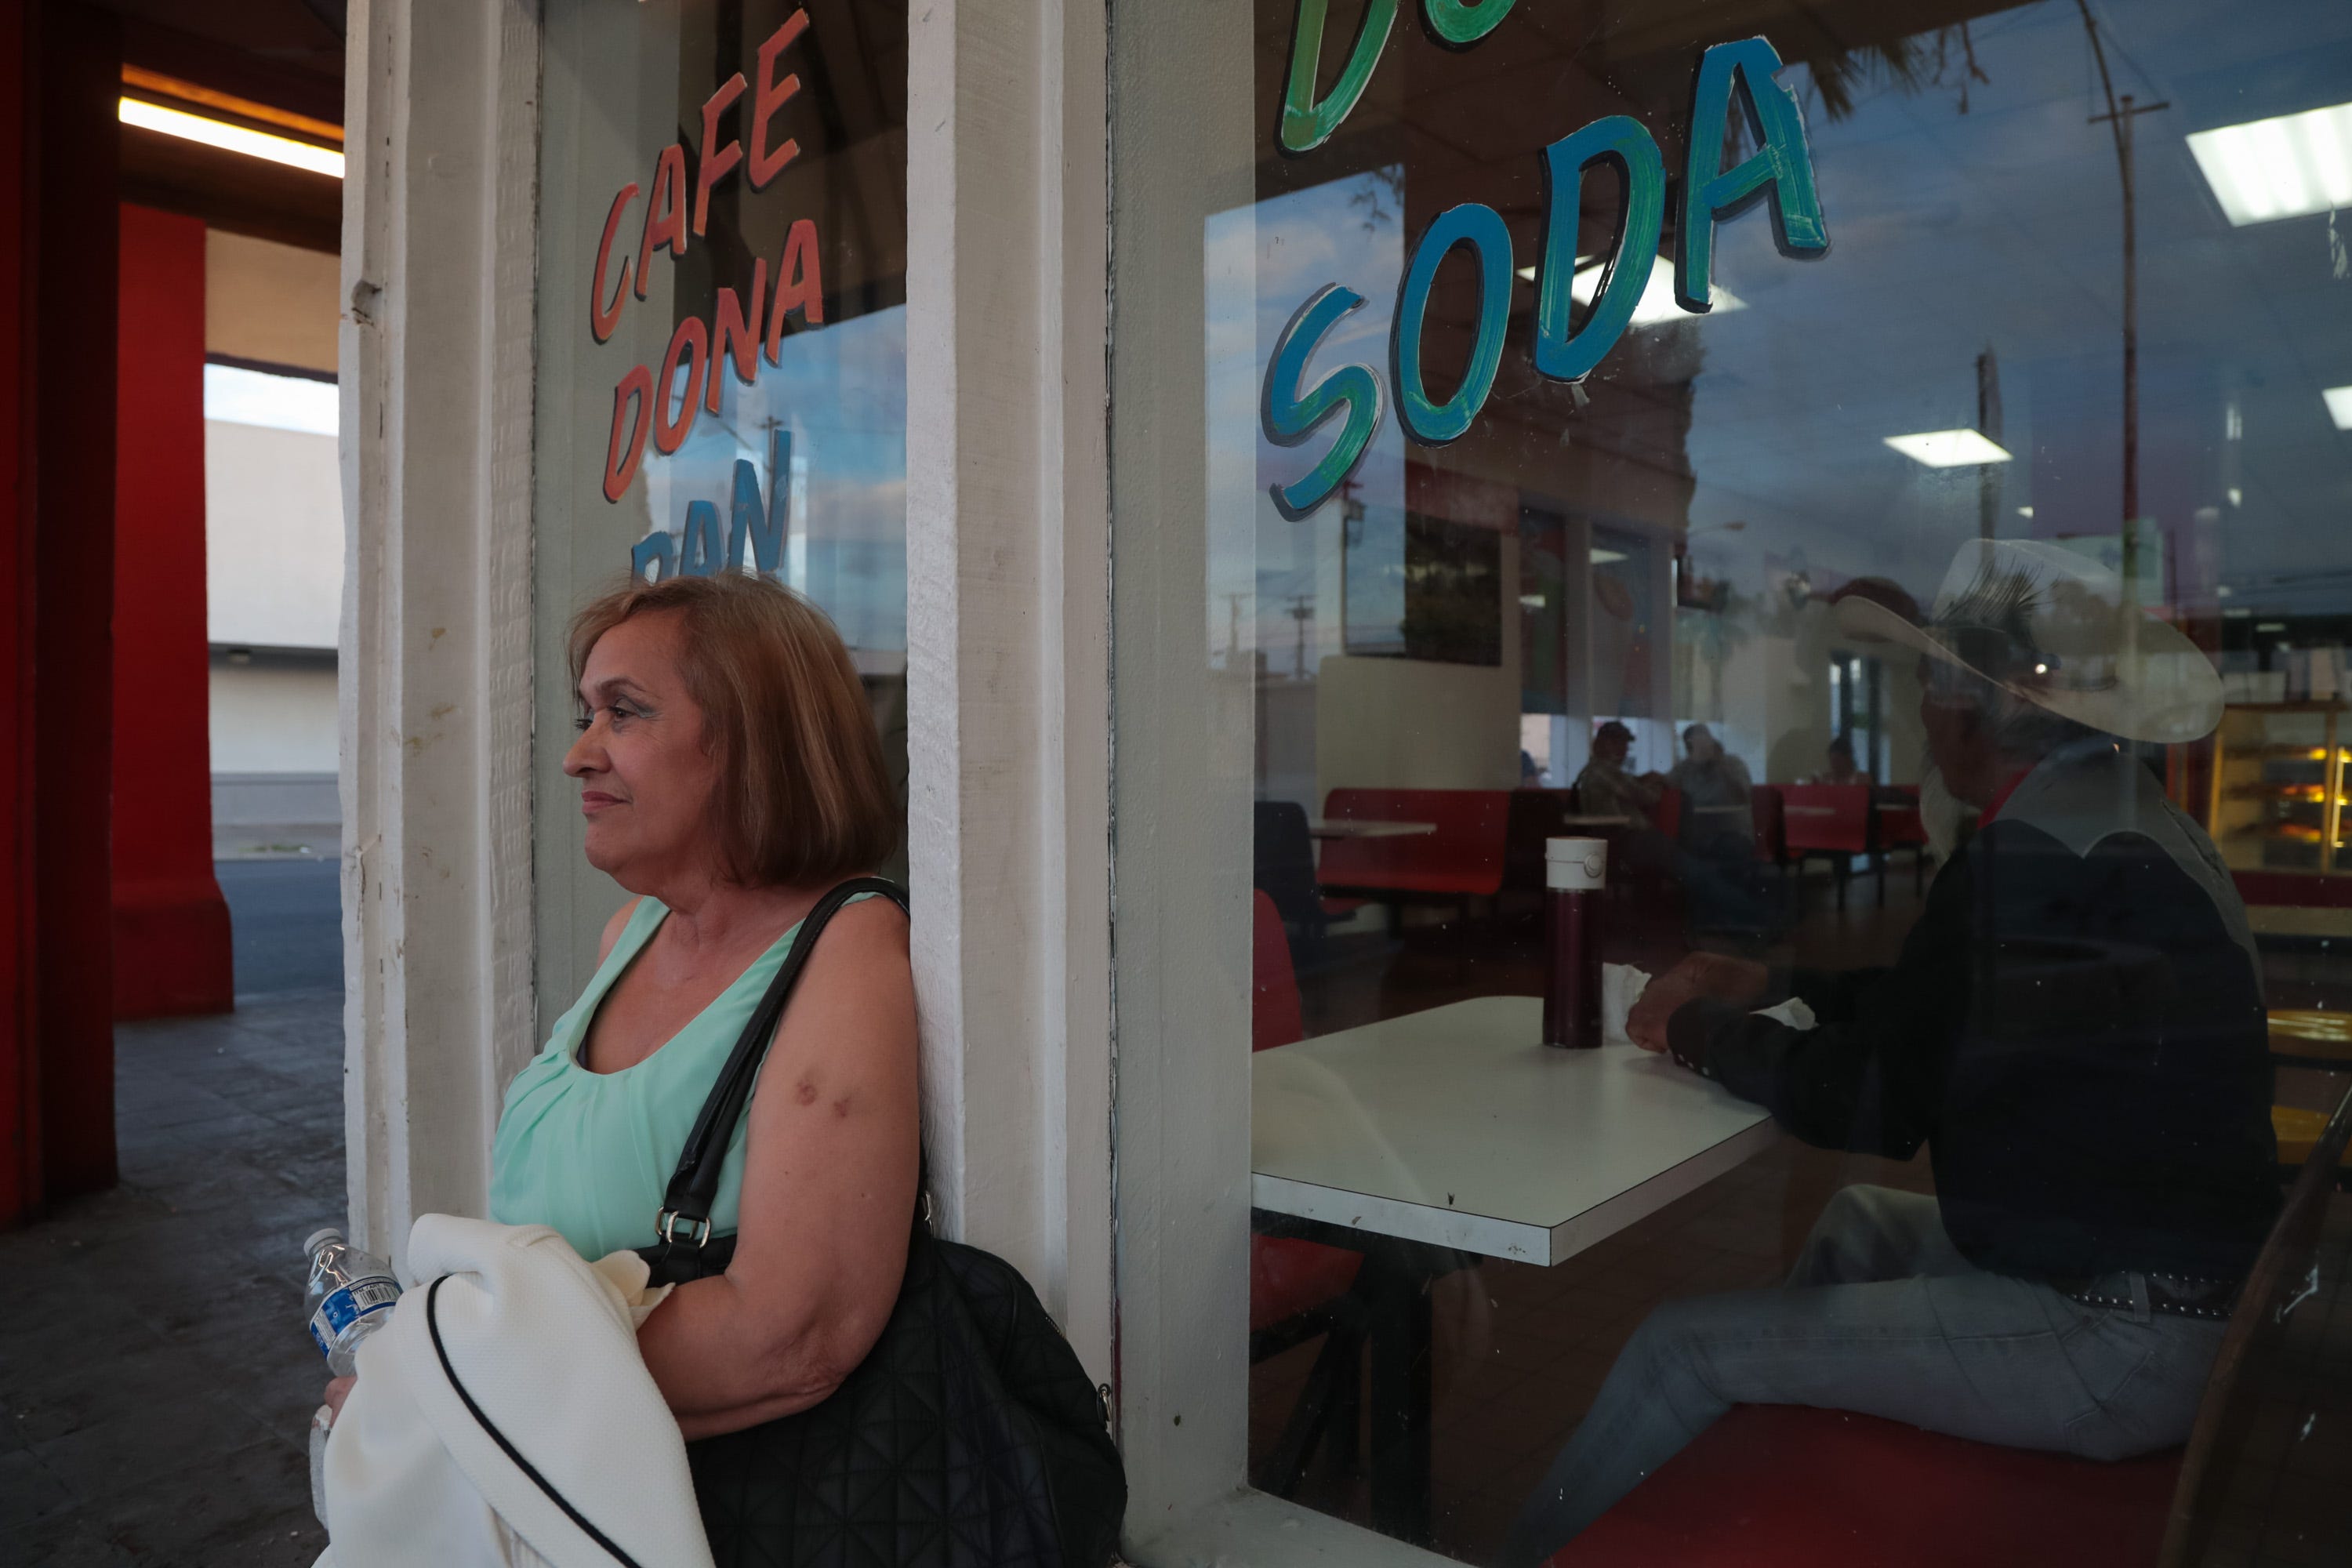 Gloria Barraza sits outside of Donut Avenue after waiting all night for a bus to Brawley, Calexico, Calif., 5:44 AM, June 12, 2019.  A man she identified as her boyfriend sits at the table behind her inside.